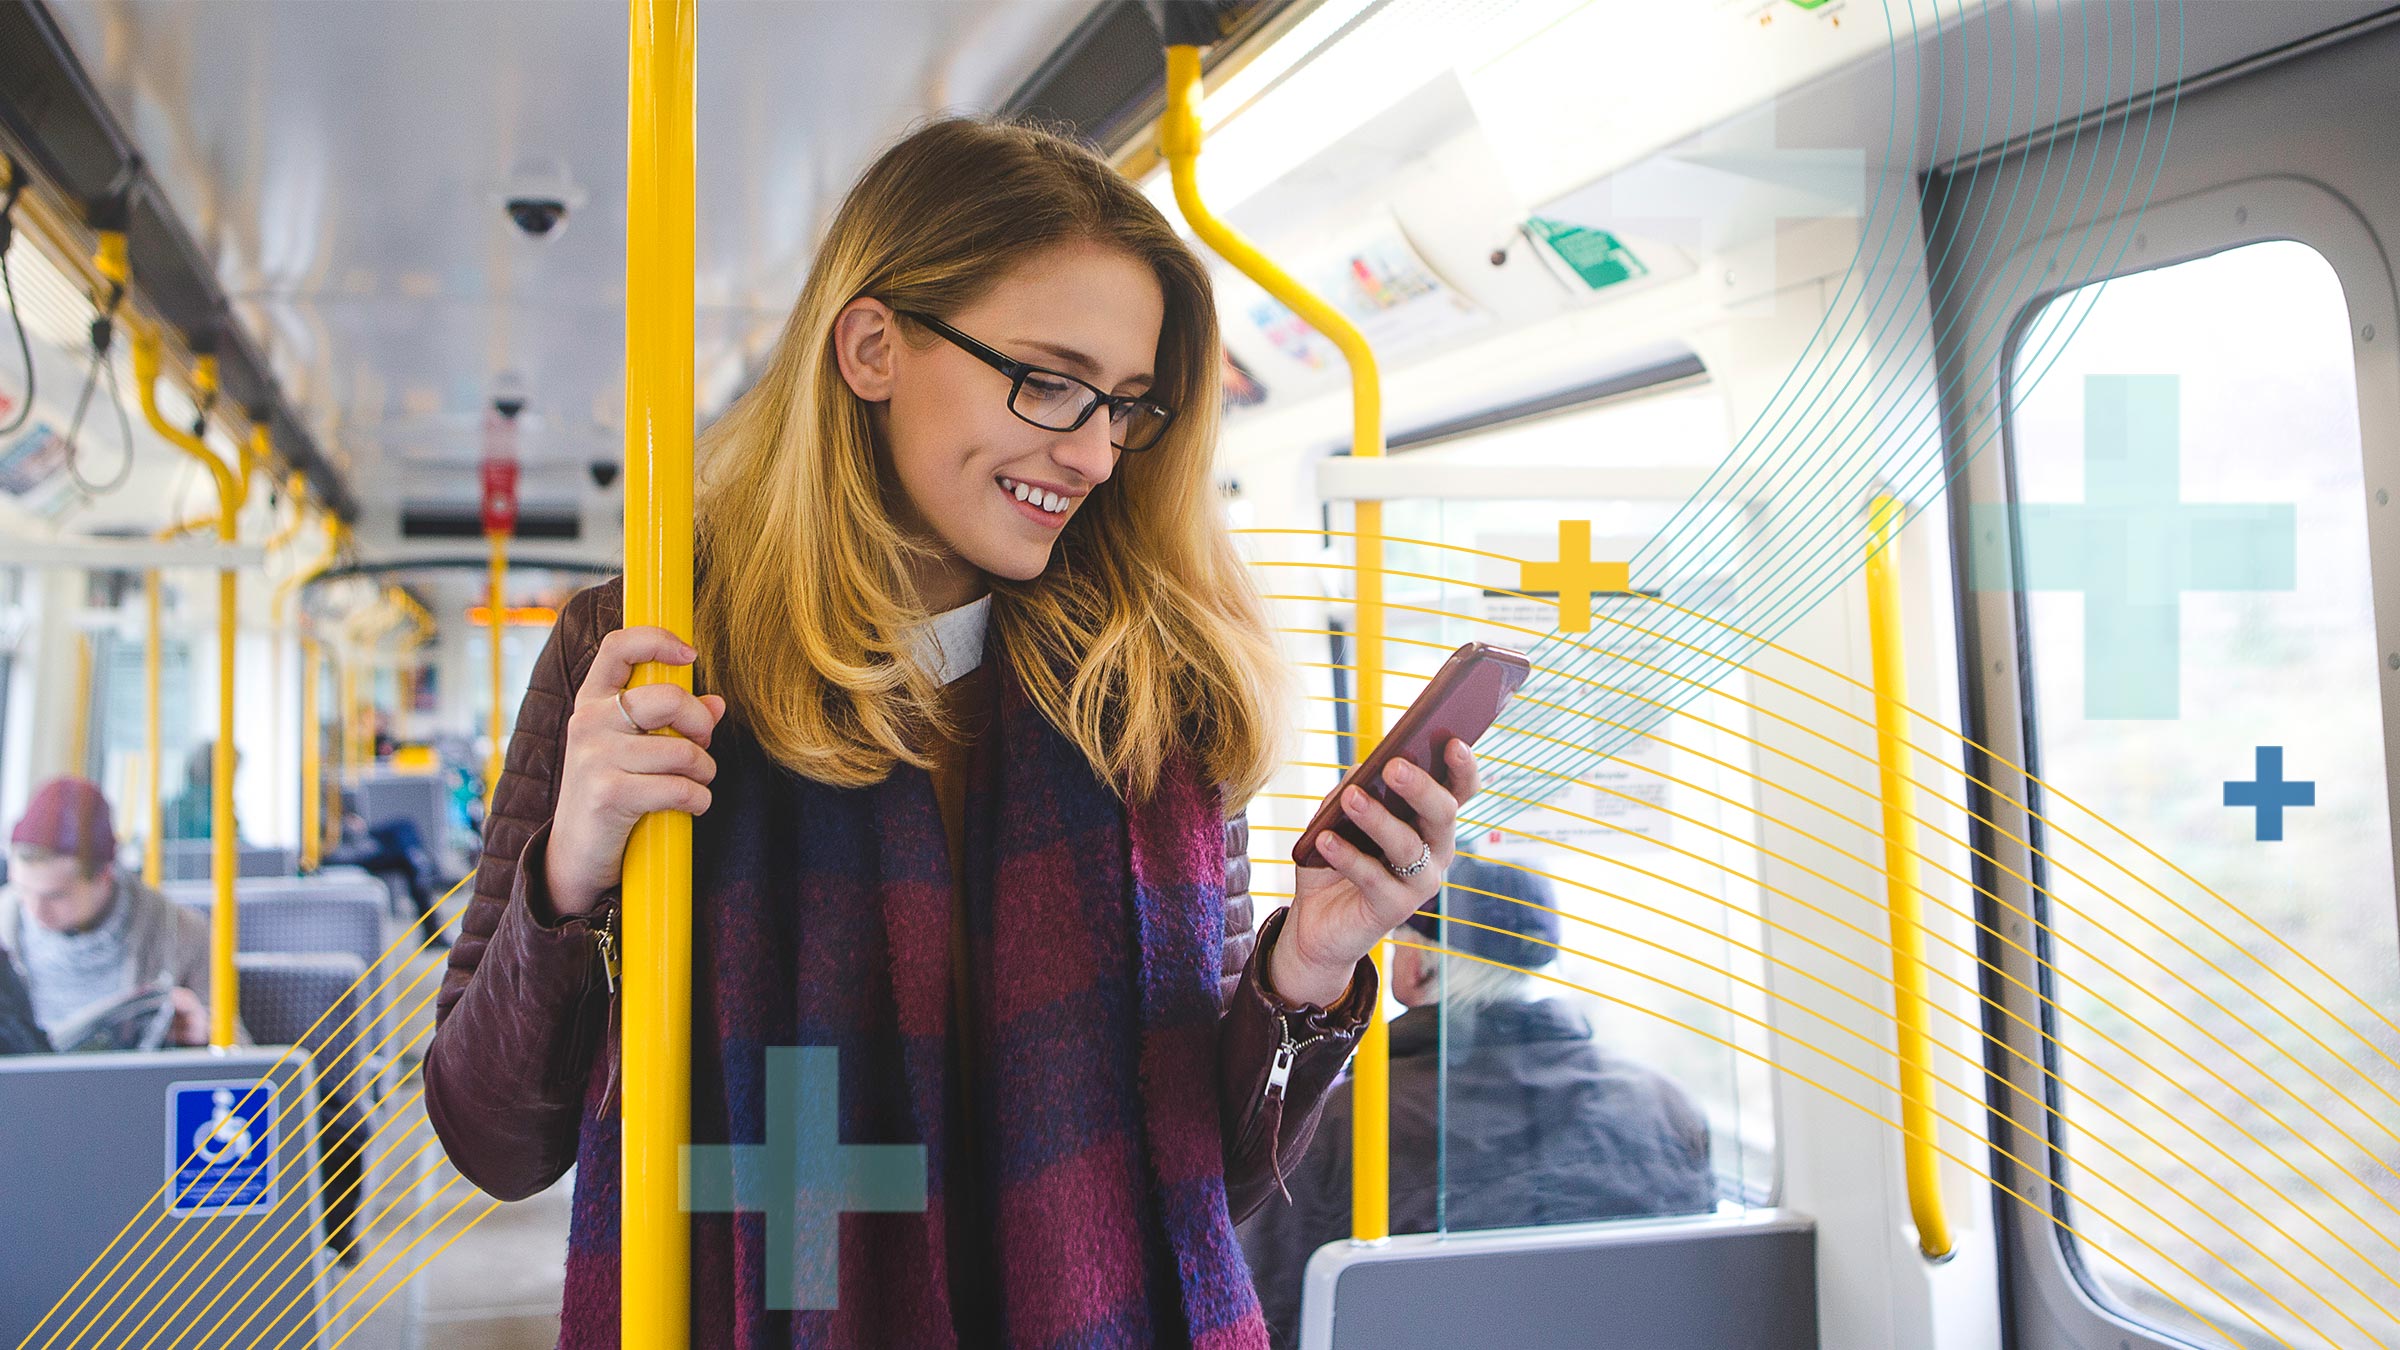 Woman on bus looking at app on phone